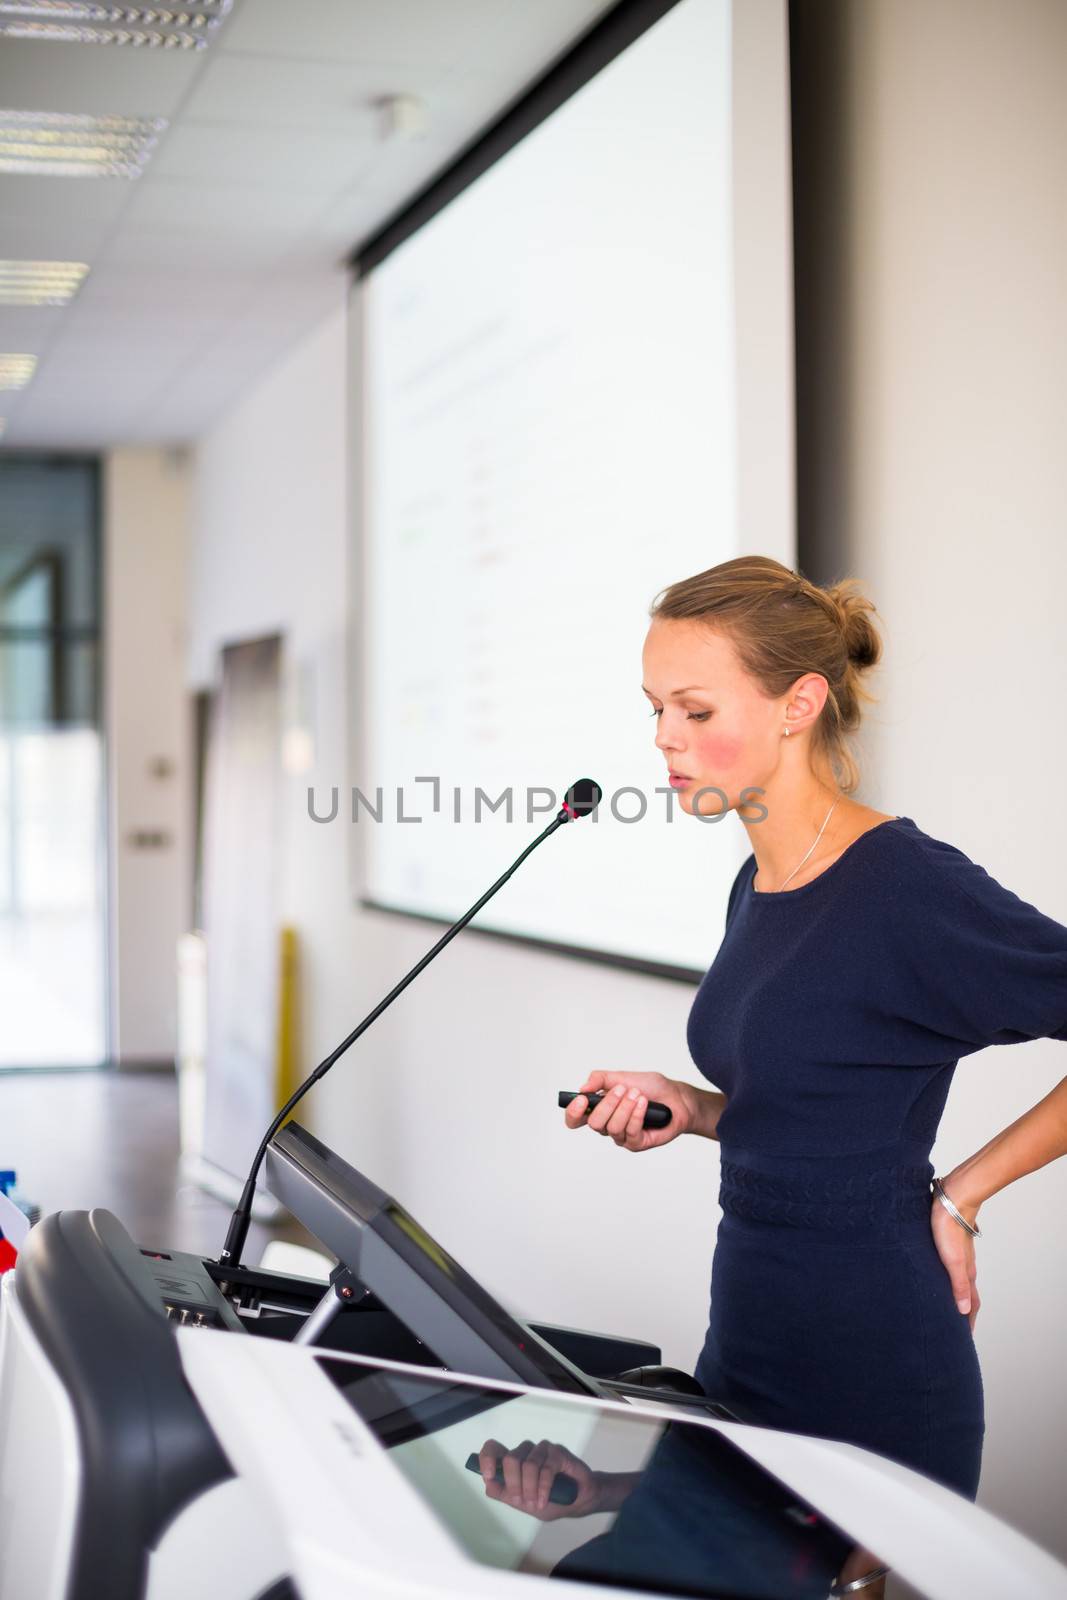 Pretty, young business woman giving a presentation in a conference/meeting setting (shallow DOF; color toned image)